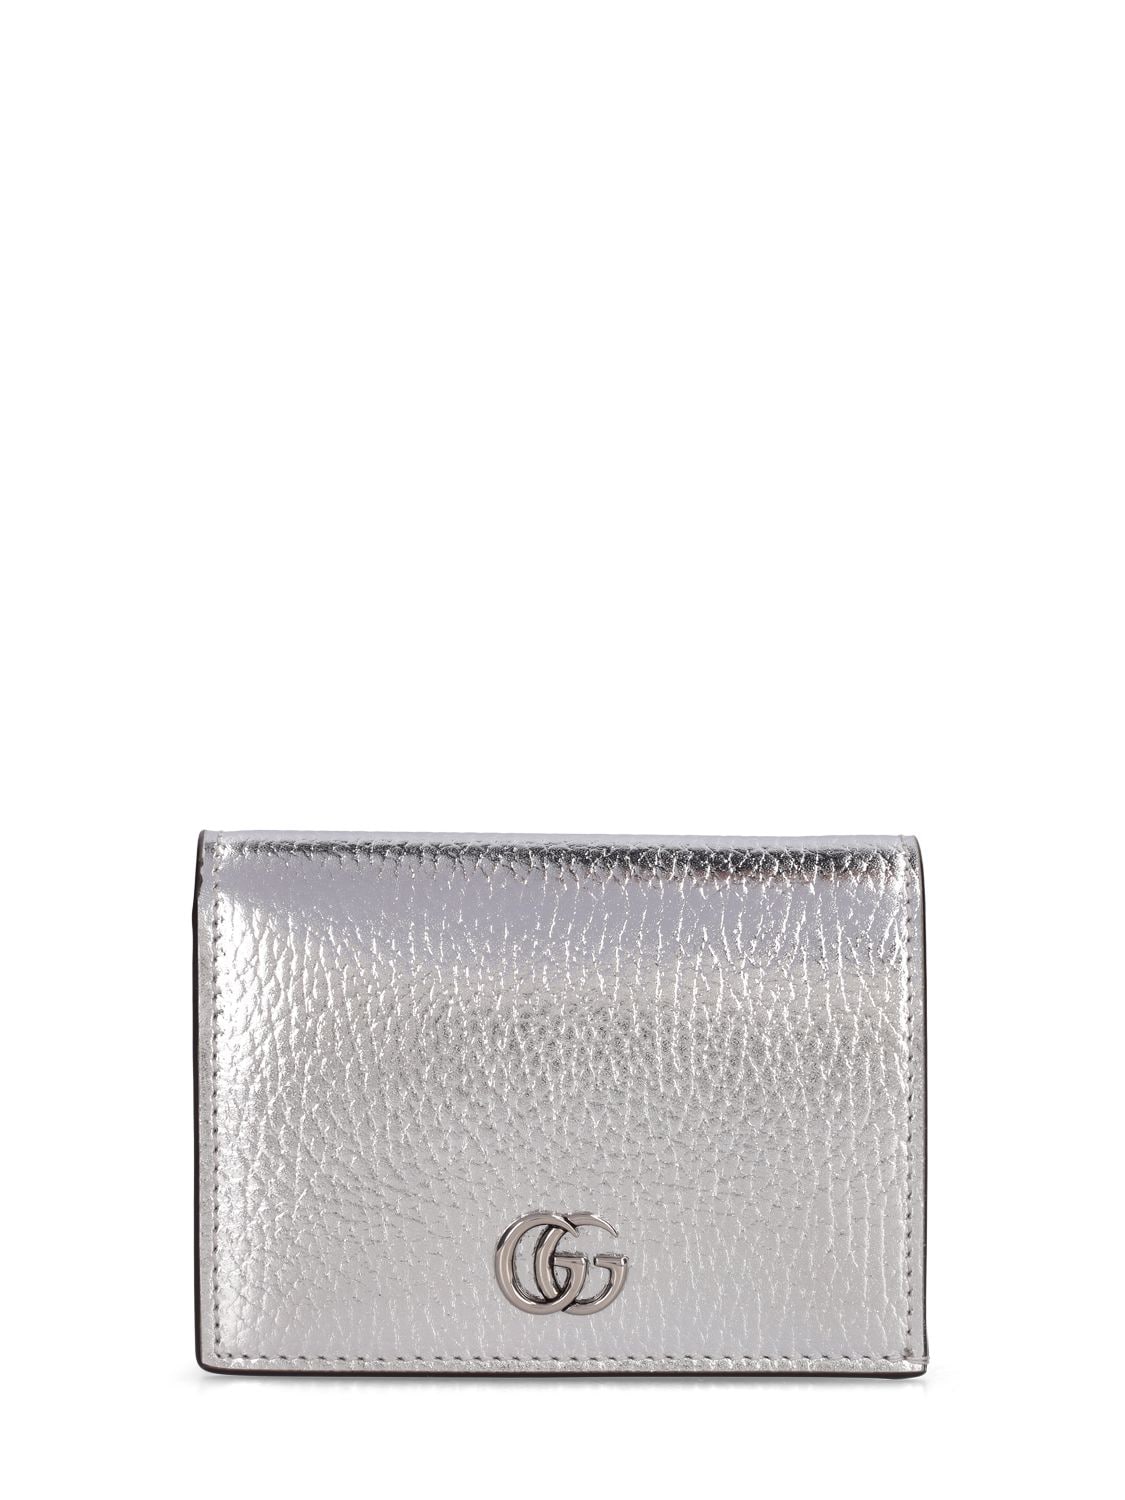 Image of Gg Petite Marmont Leather Wallet